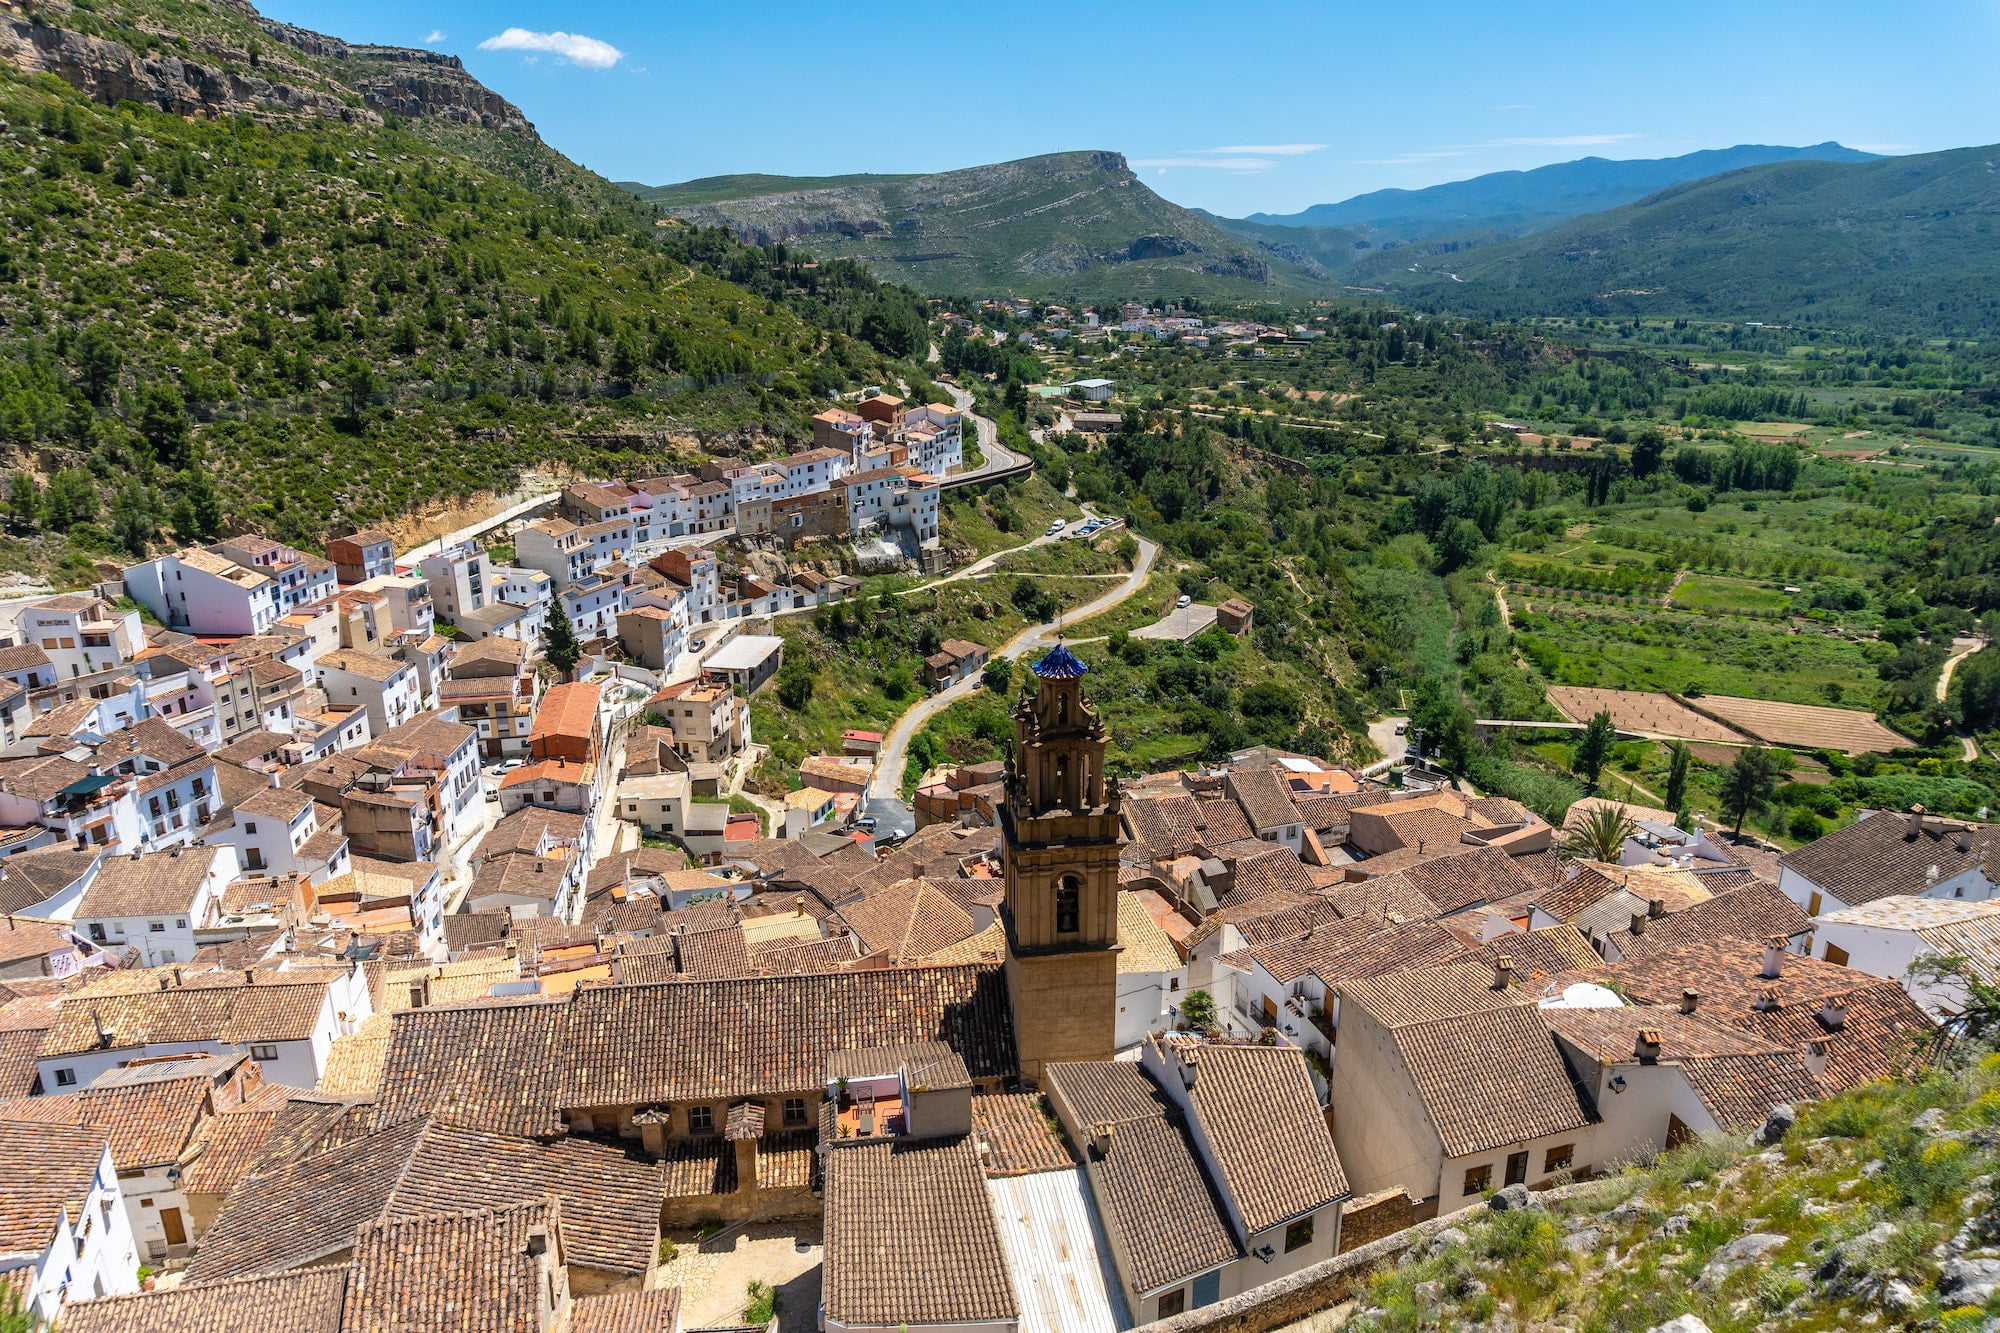 View of the town from the castle of the town of Chulilla in the mountains